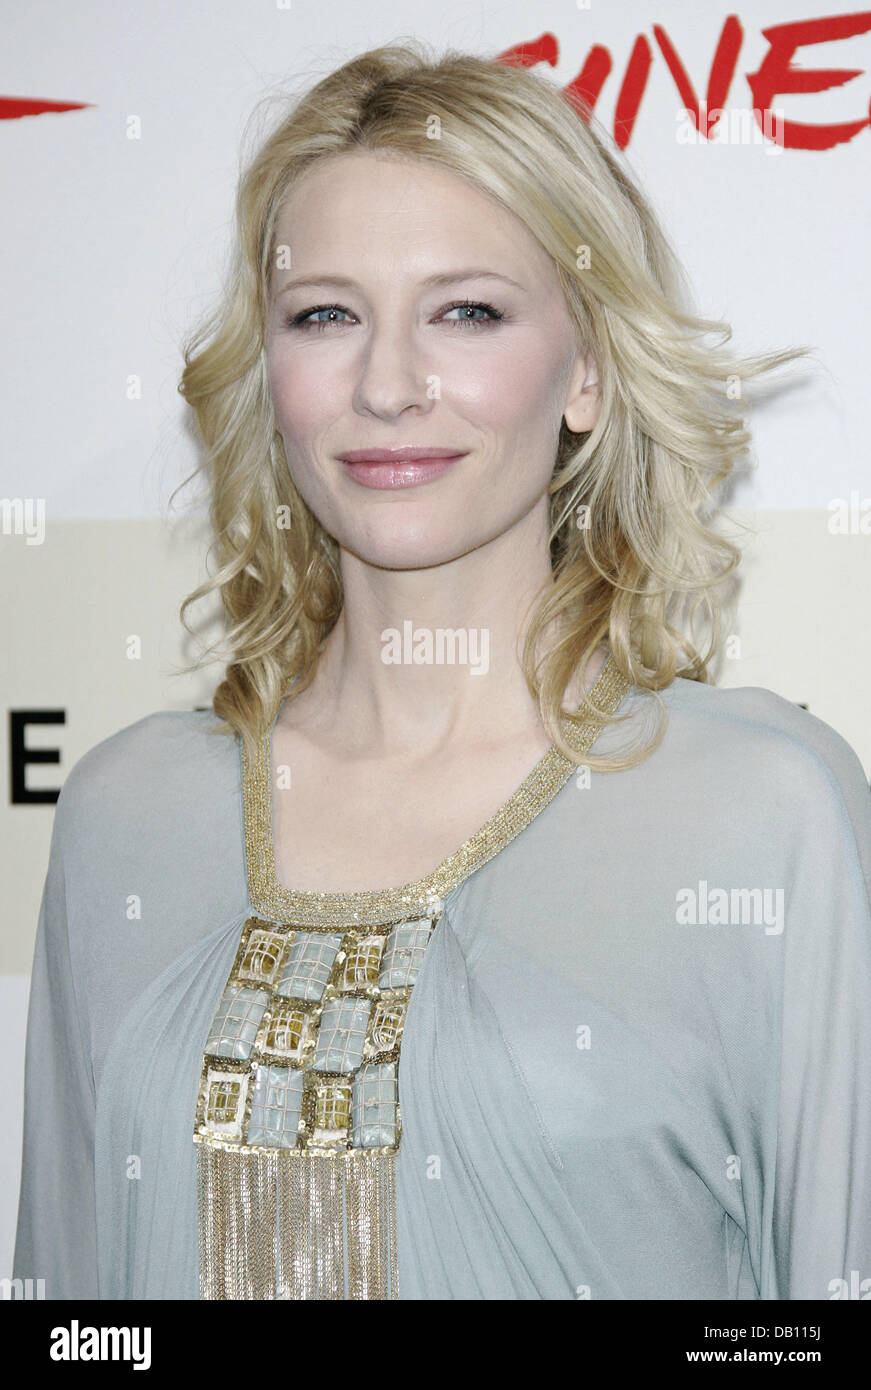 Actress Cate Blanchett poses prior to the press conference for the film 'Elizabeth: The Golden Age' at the Auditorium Parco De La Musica during the 2nd Rome Film Fest in Rome, Italy, 19 October 2007. Photo: Hubert Boesl Stock Photo